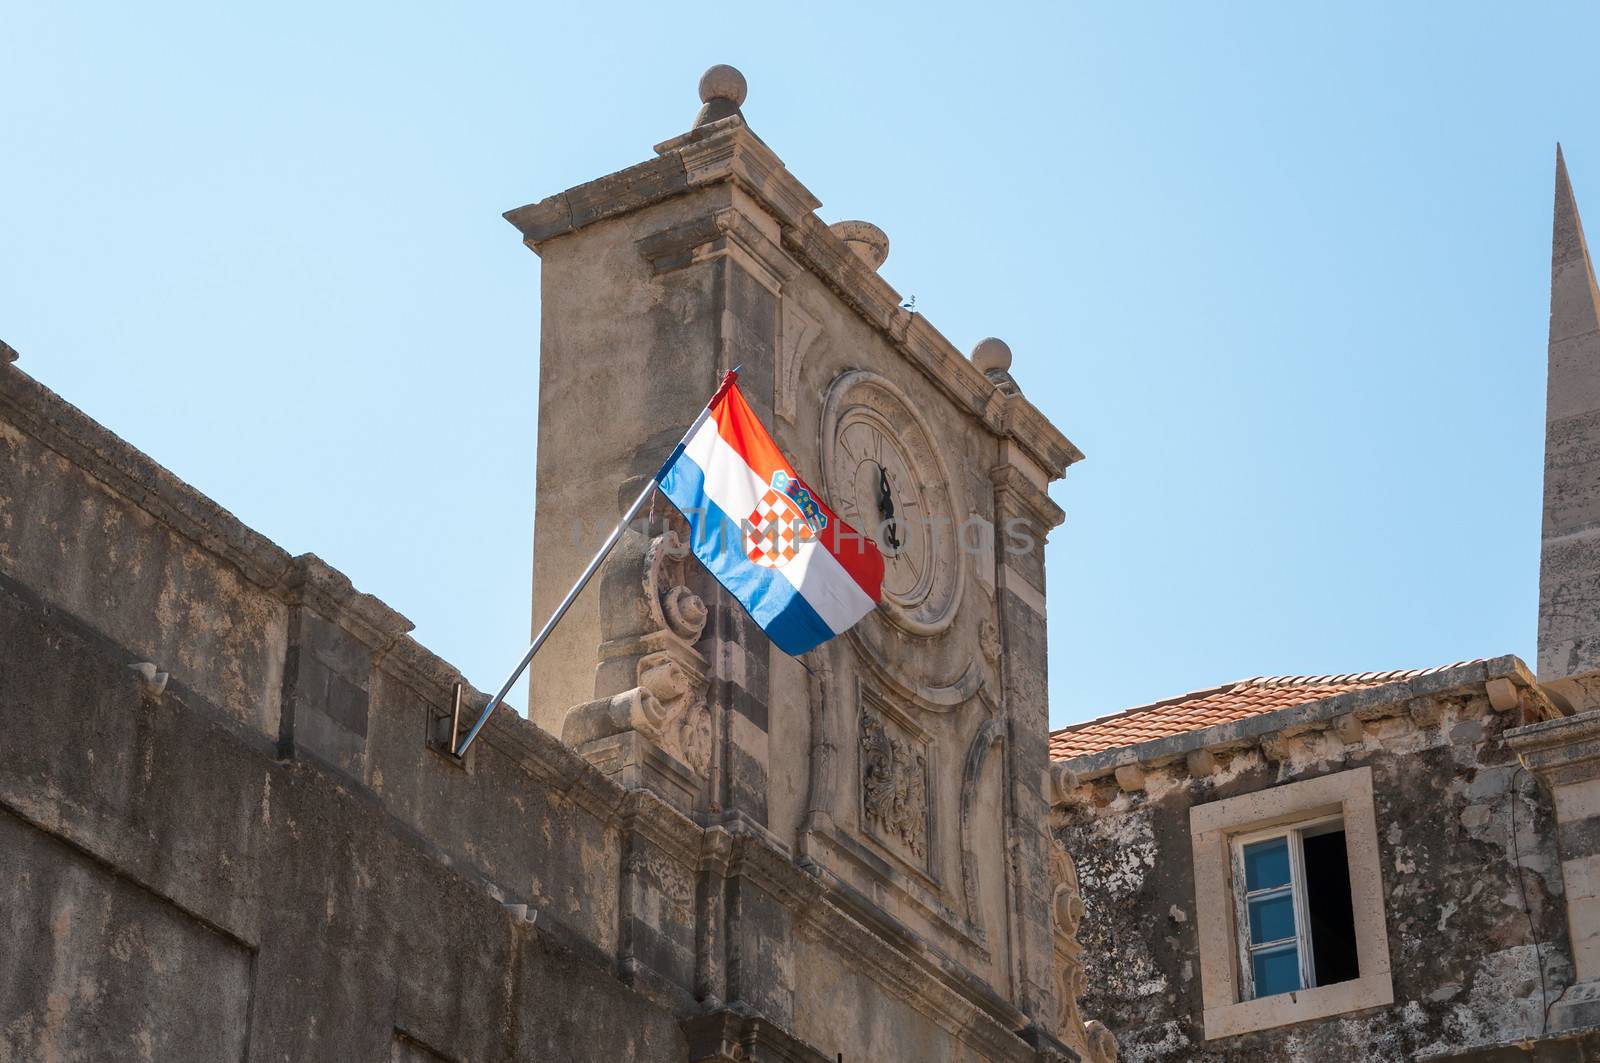 Old clock and croatian flag. by mkos83